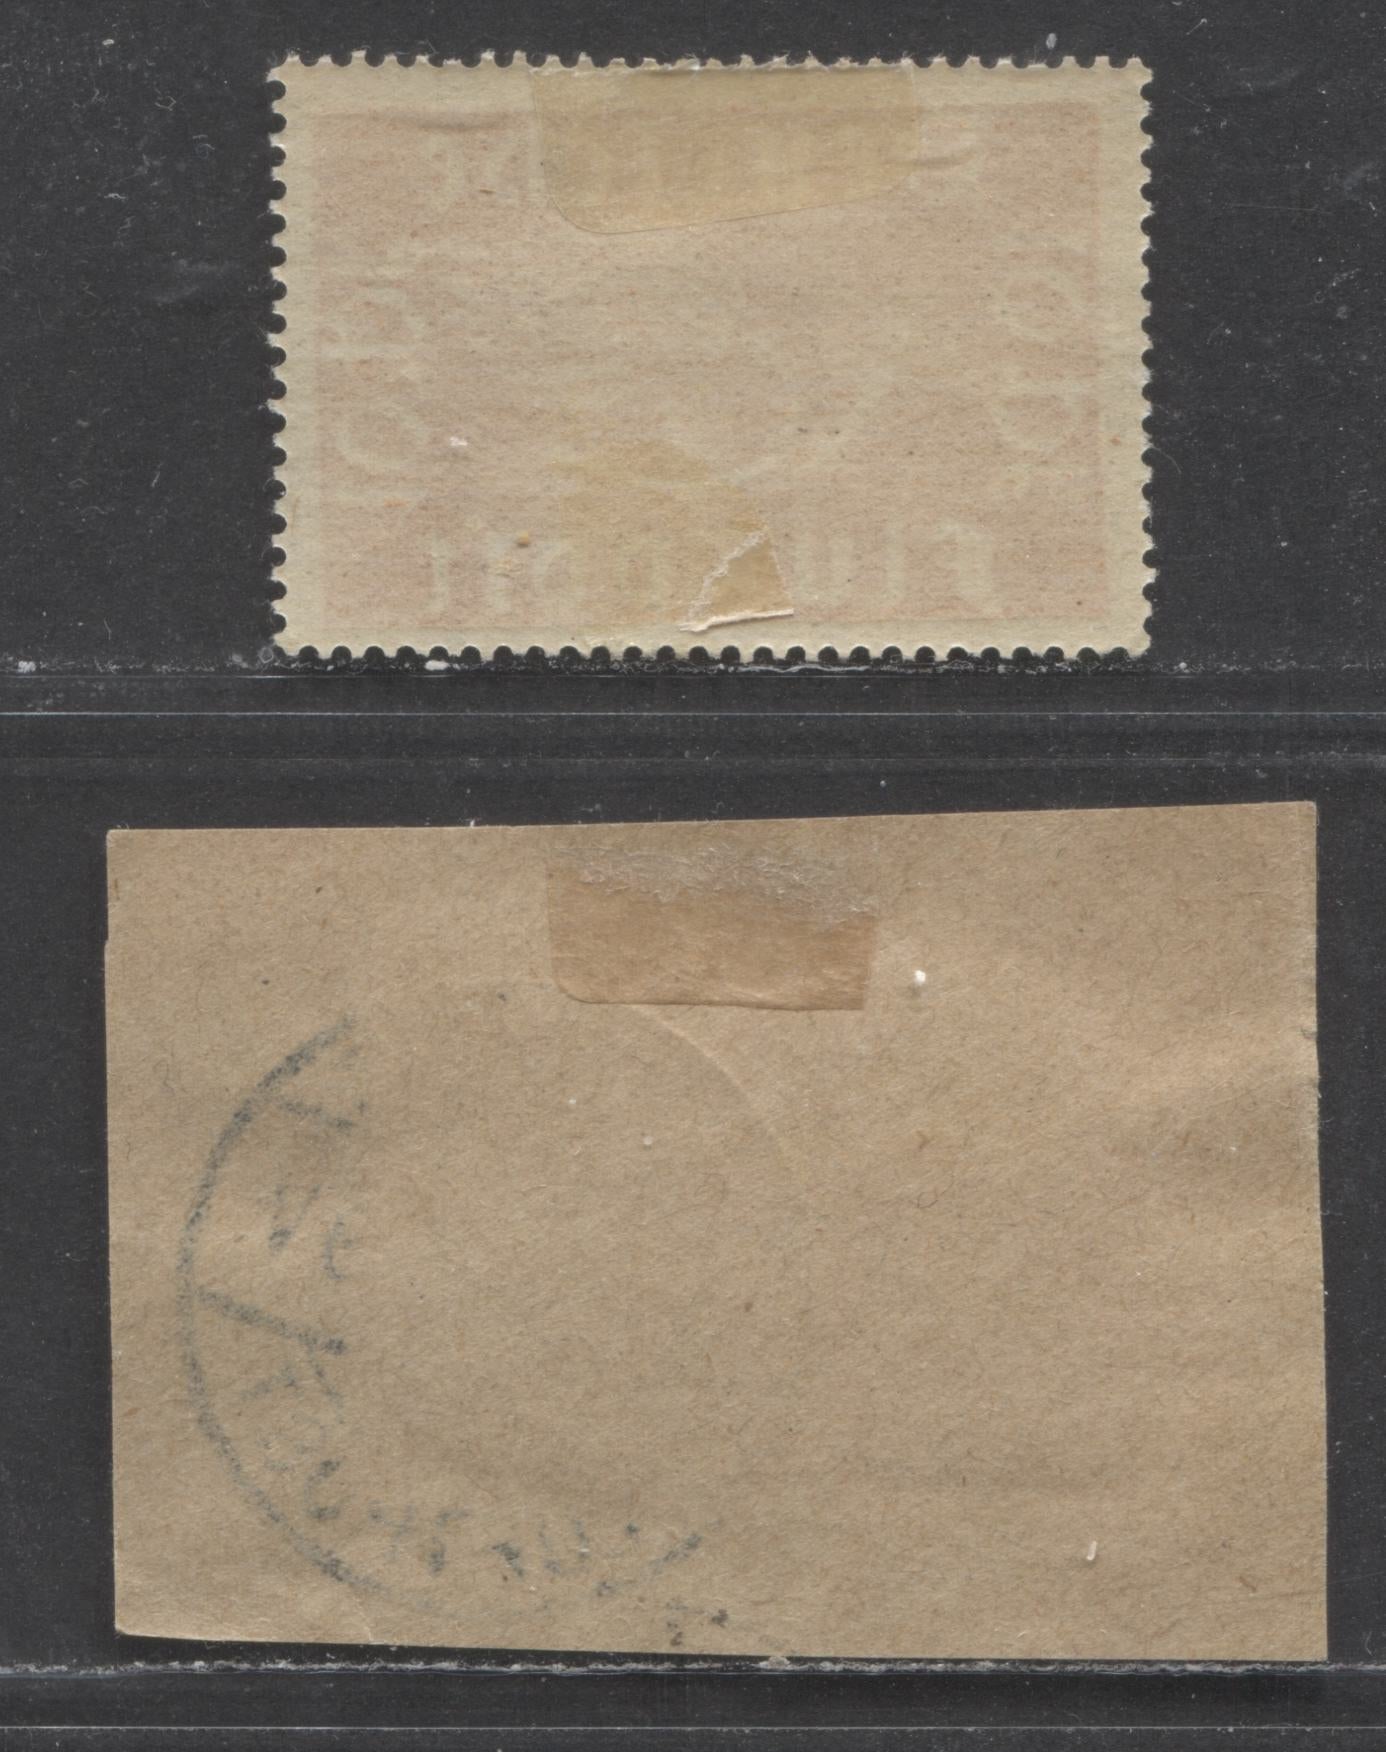 Lot 94 Germany SC#C4(MI#211) 40pf Lively Red Orange 1922-1923 Airmail Issue, With August 15, 1922 Leipzig CDS, A F/VF Postally Used Single, Click on Listing to See ALL Pictures, Estimated Value $5.00-10.00 USD